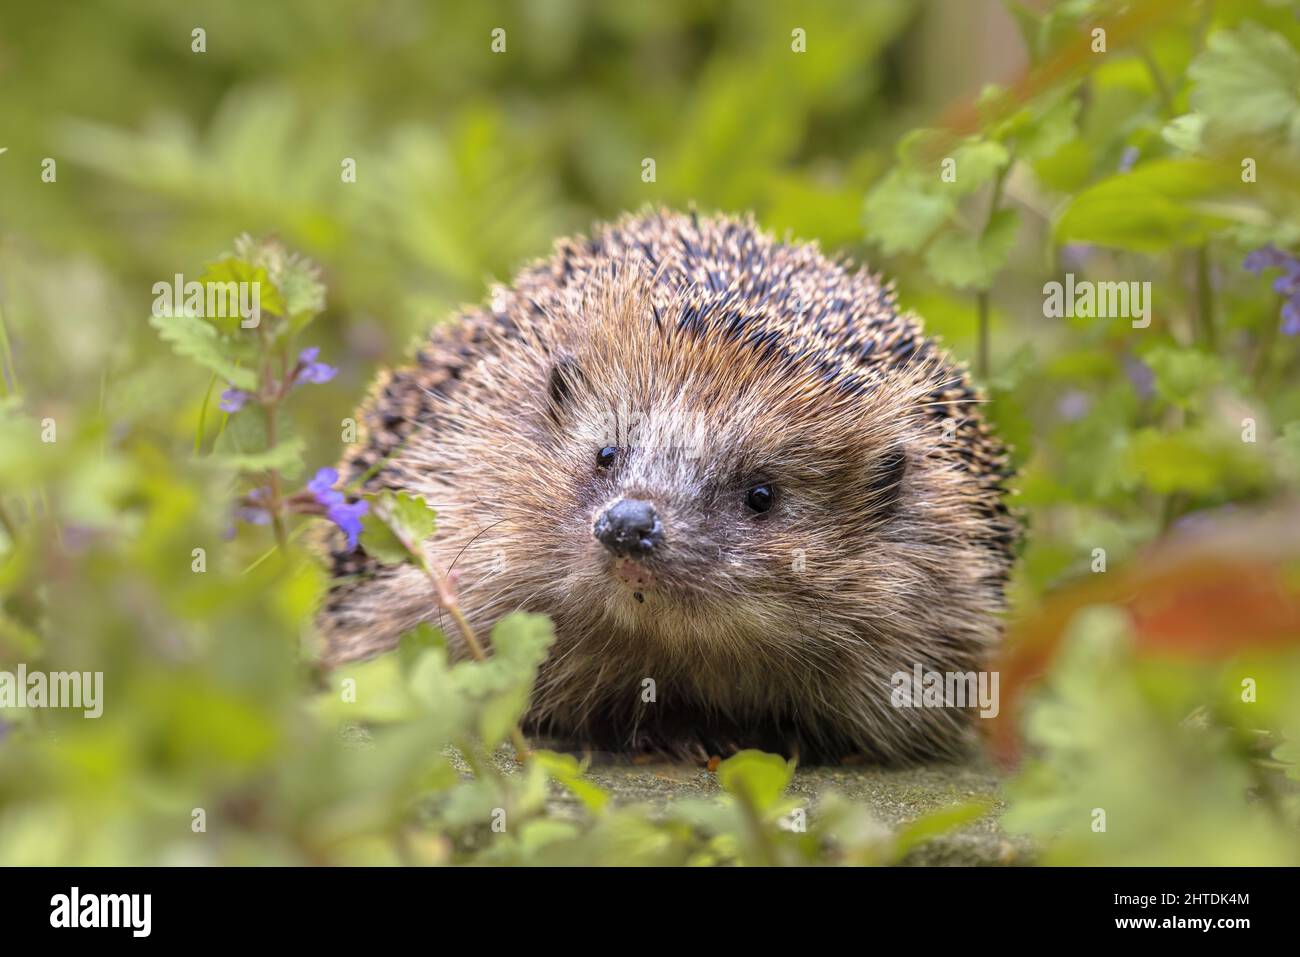 European hedgehog (Erinaceus europaeus) walking in garden with blue flowers. Teh west European hedgehog is native to Europe and can survive across a w Stock Photo